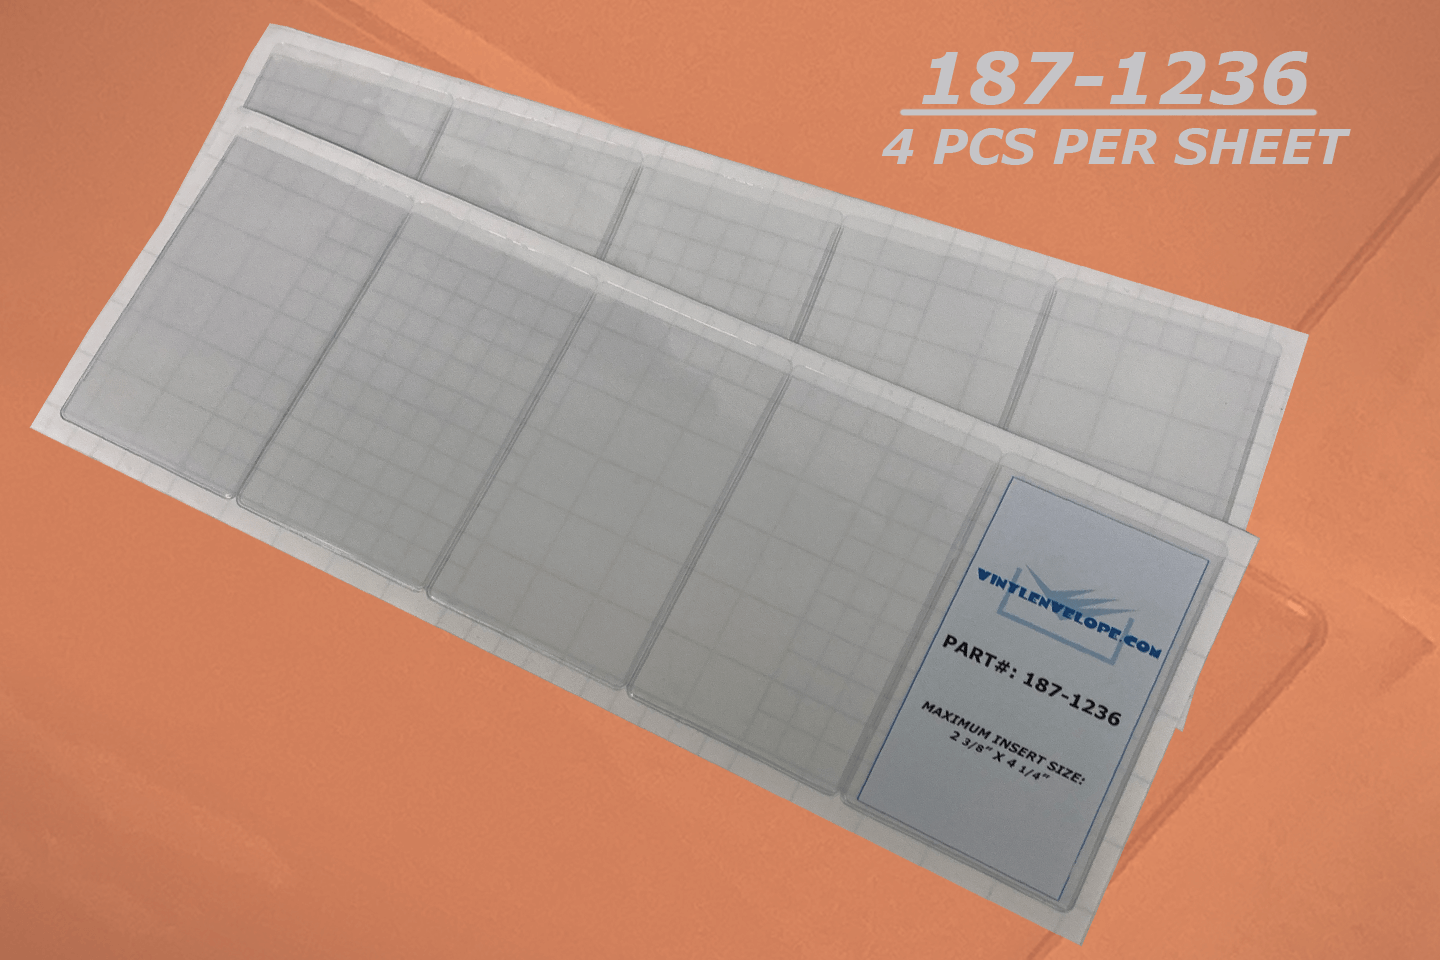 2 3/4" X 4 5/8" Removable Adhesive Pouch